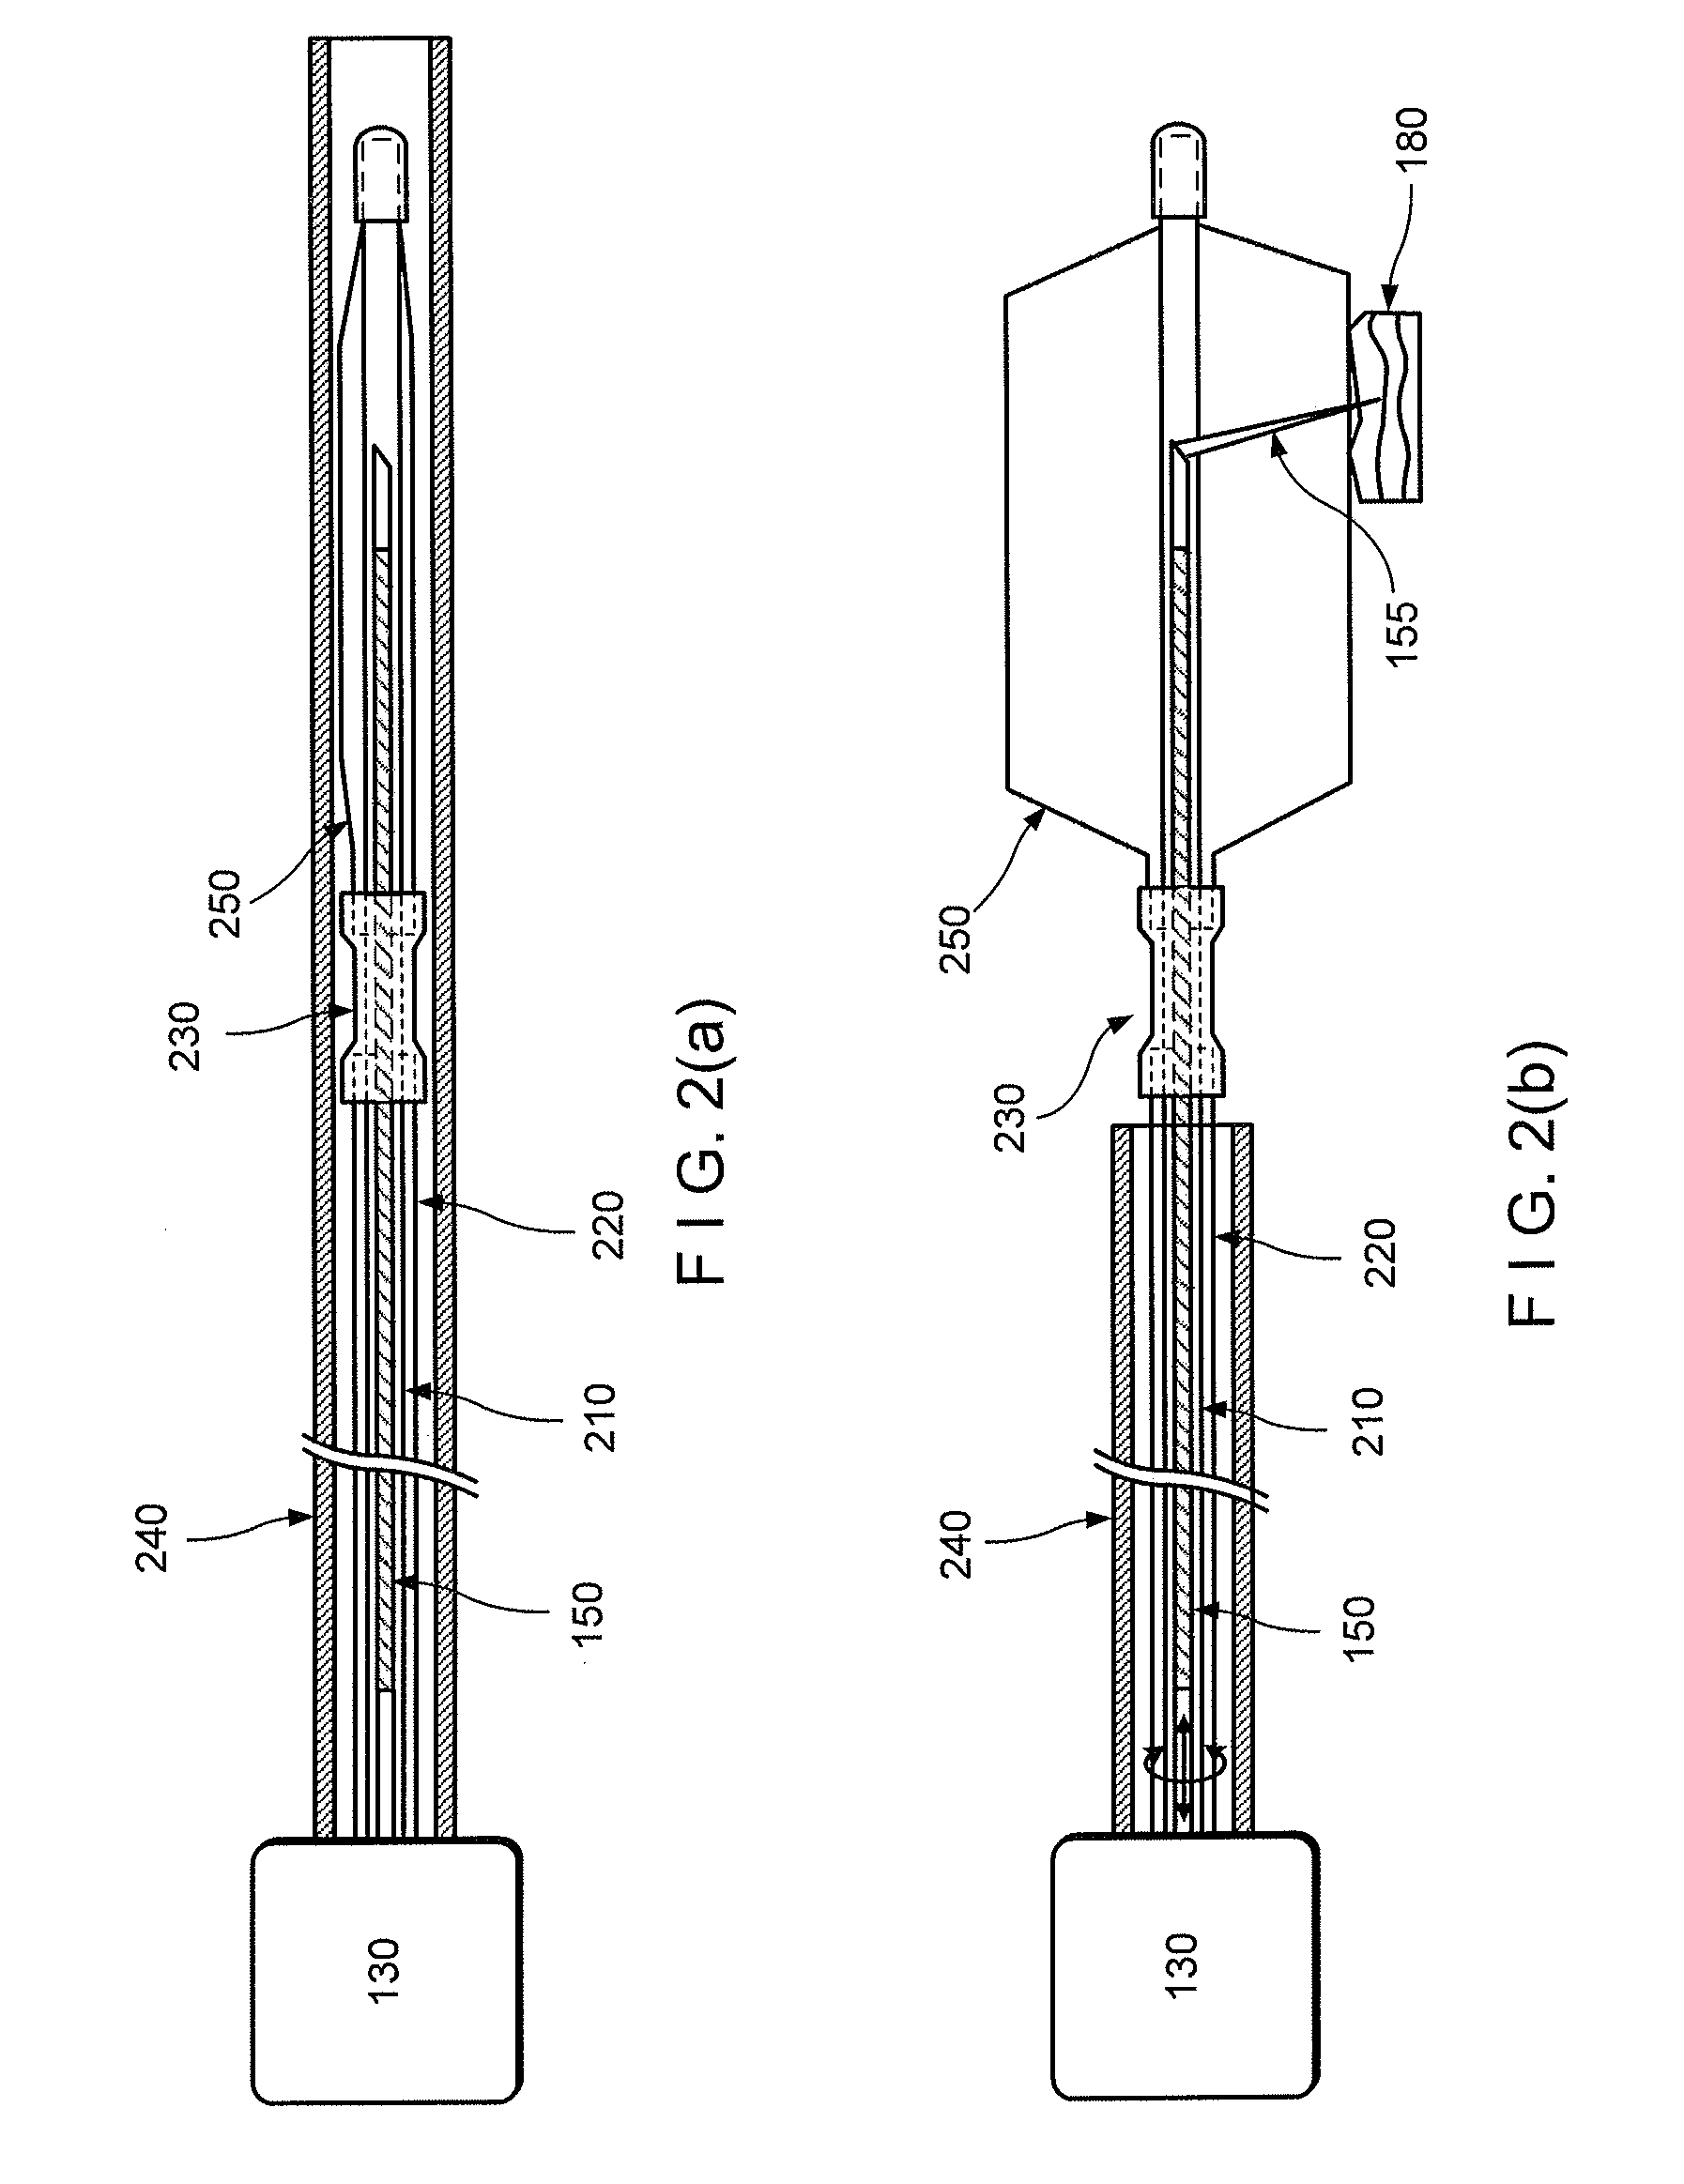 Apparatus and method for devices for imaging structures in or at one or more luminal organs